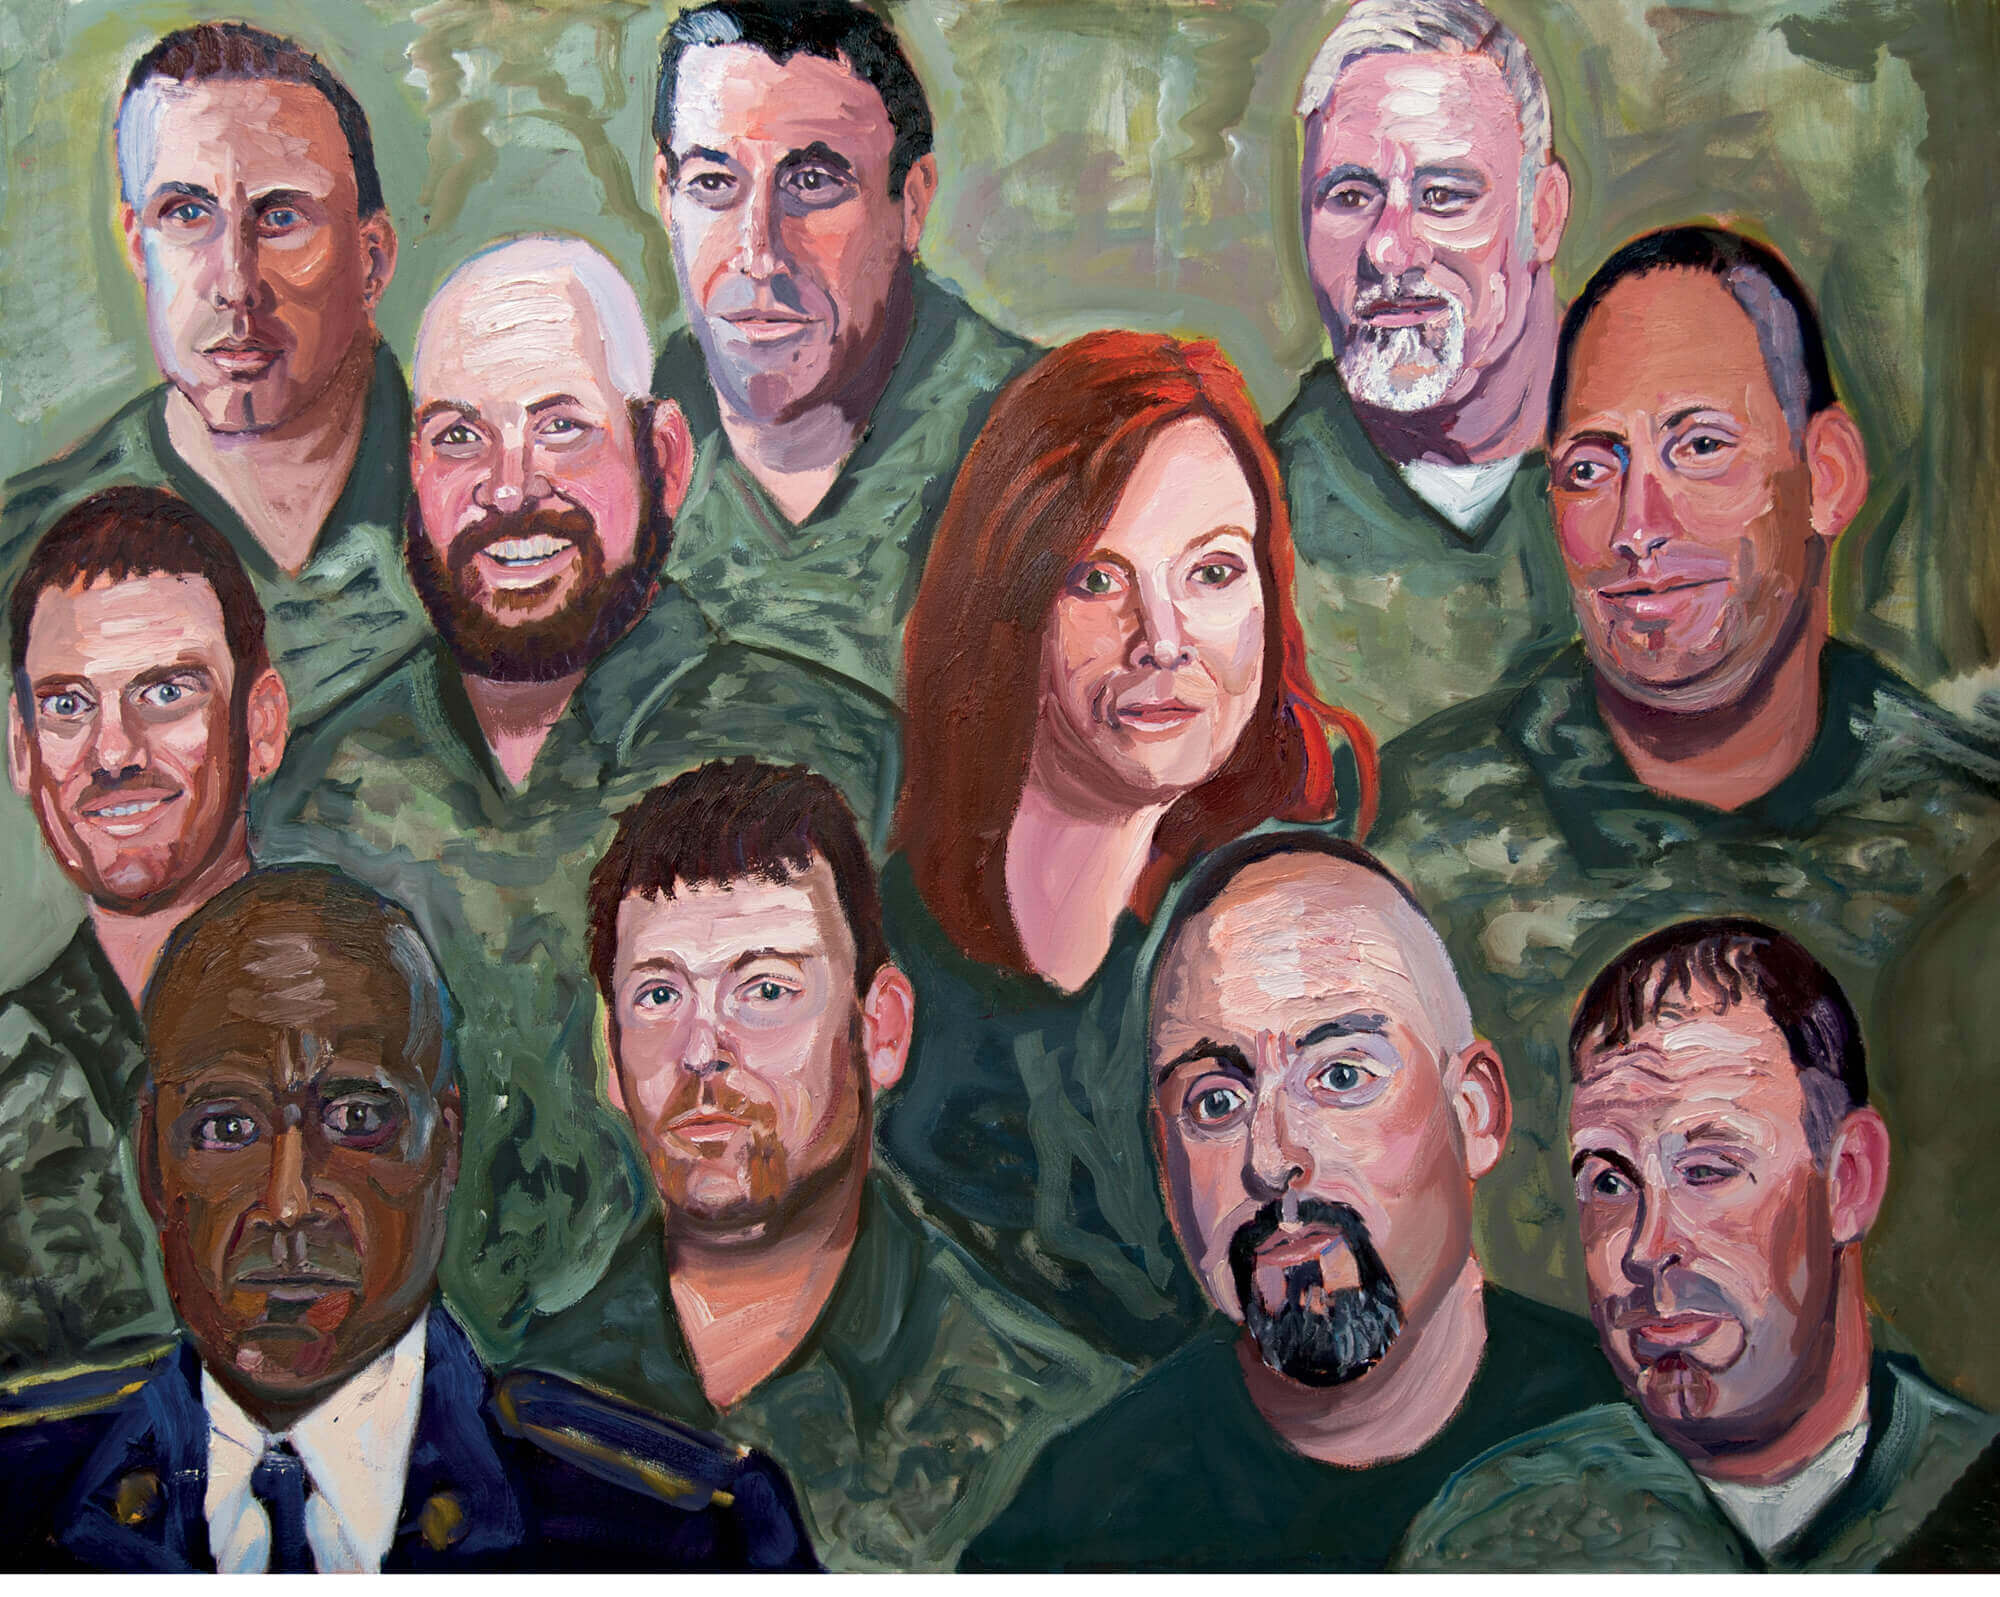 74. MURAL OF AMERICA’S ARMED FORCES